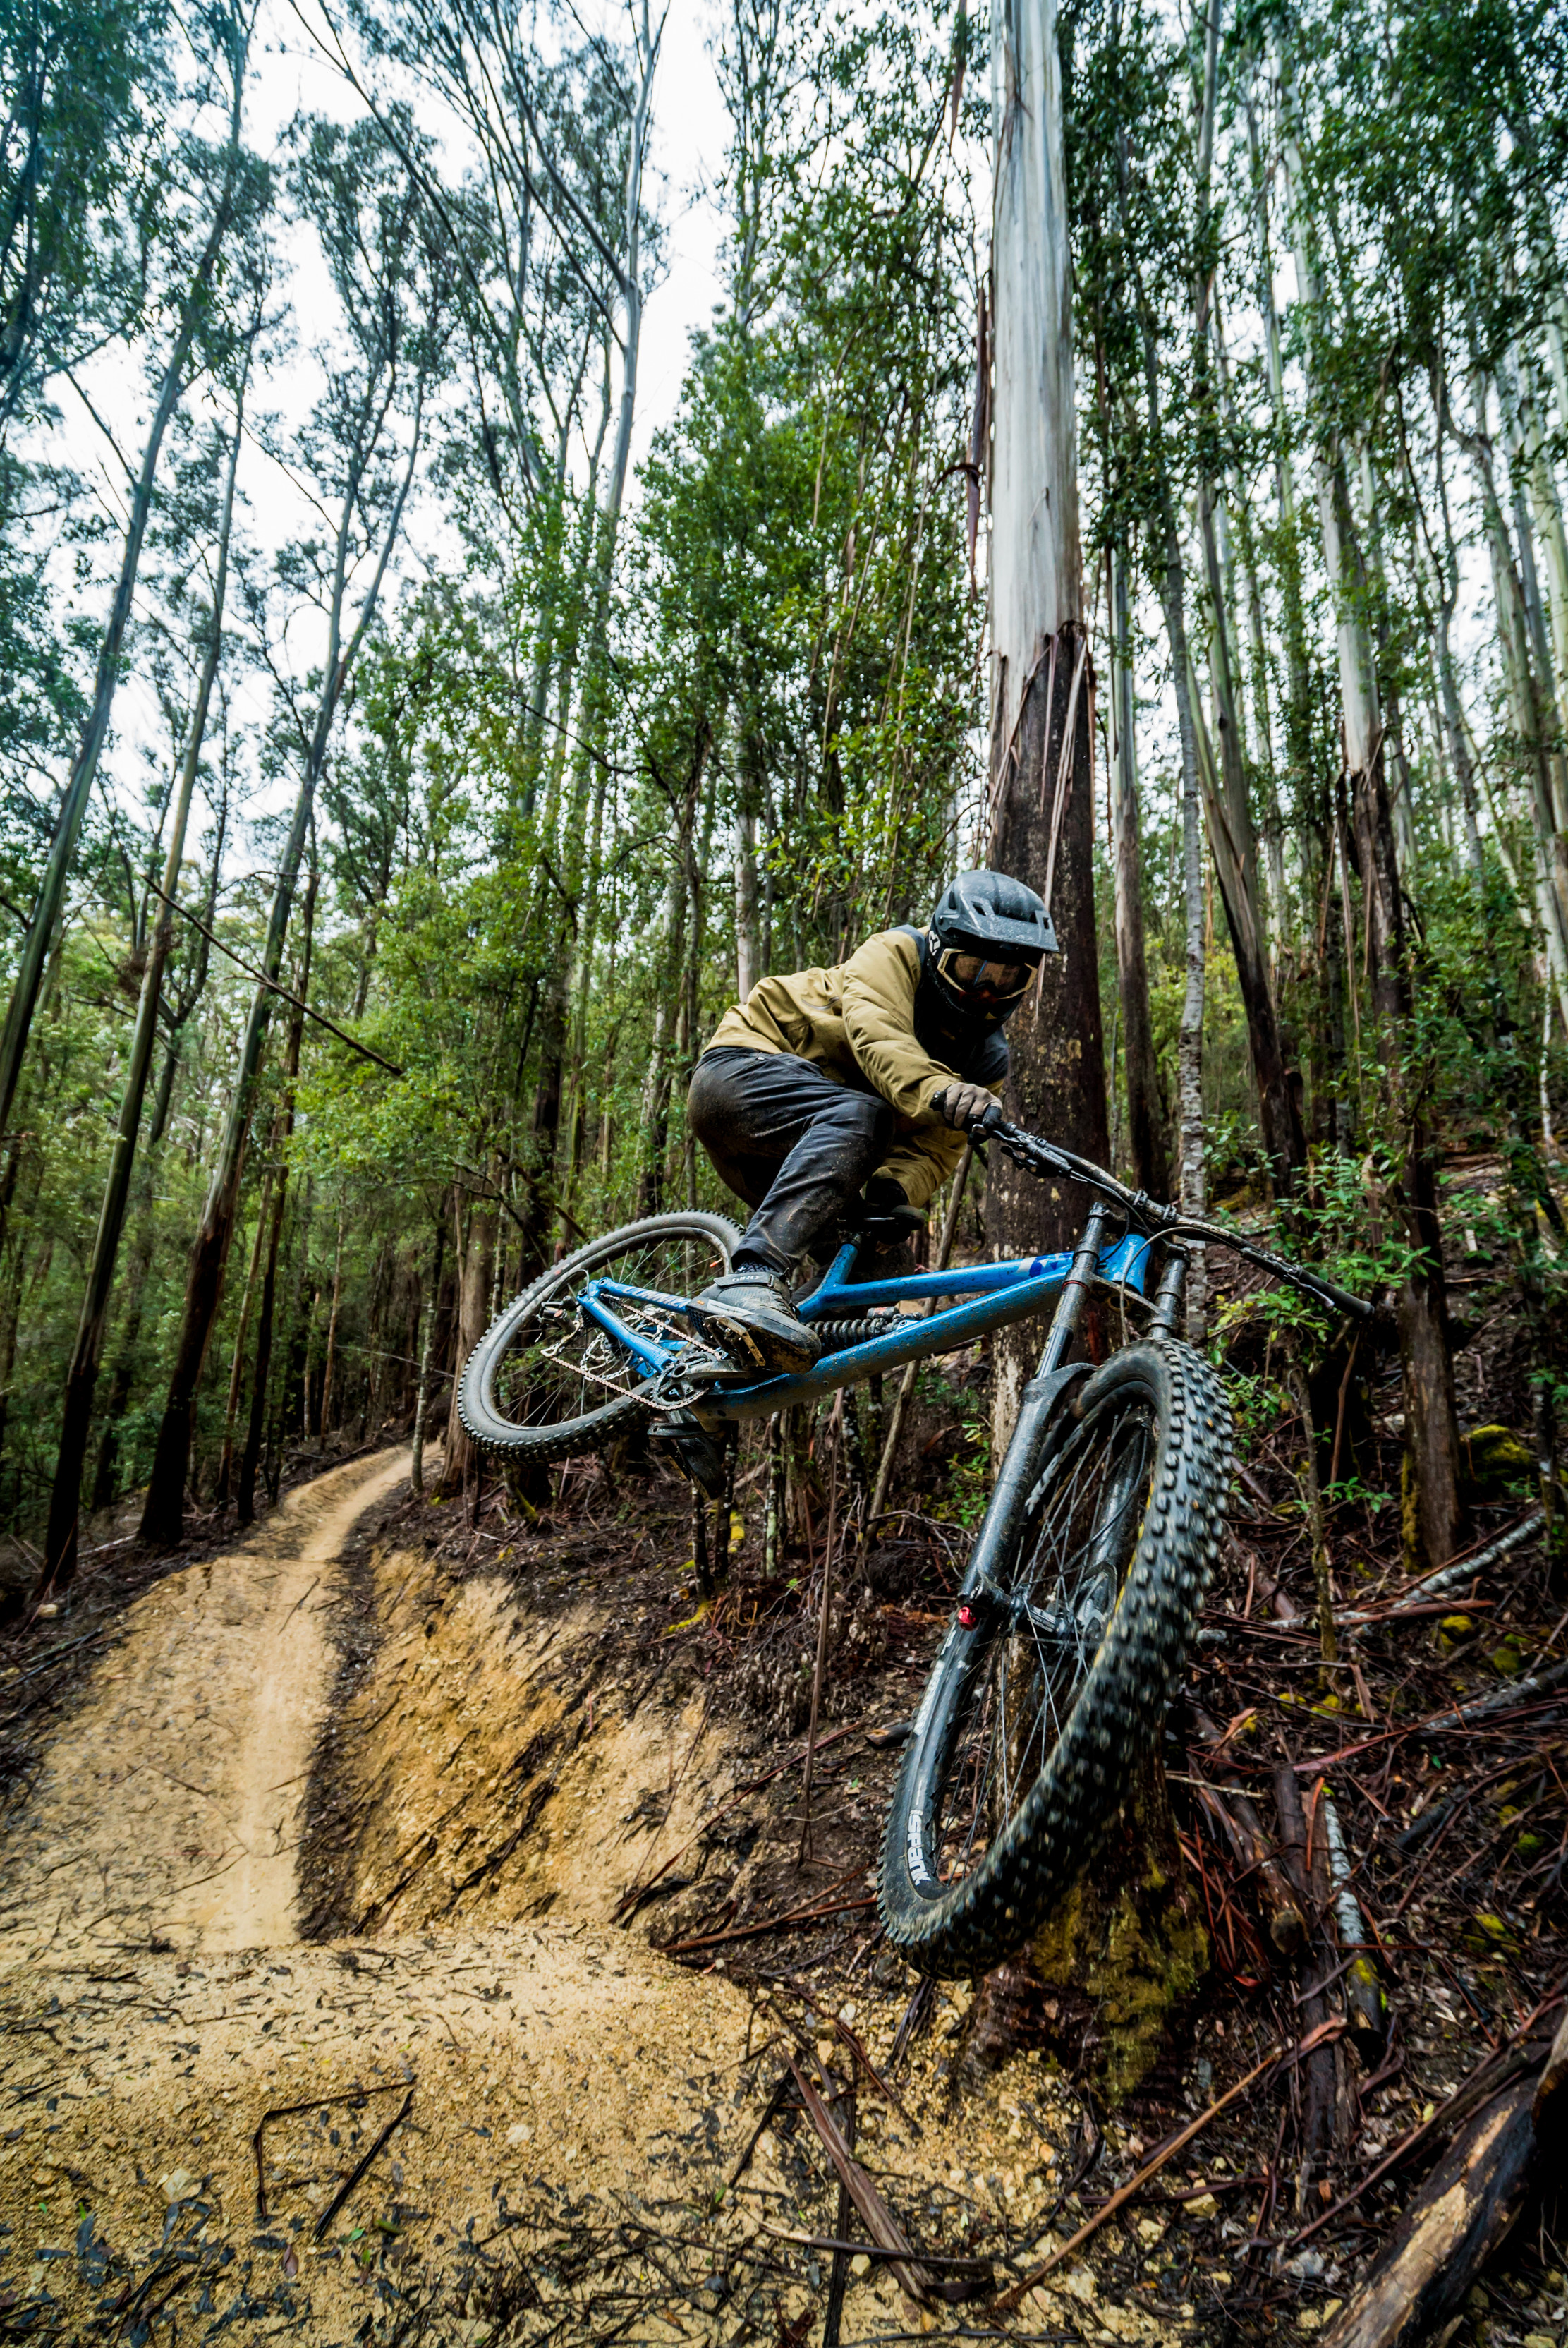 Mountain biker ripping through the Maydena Bike Park. Surrounded by tall trees and dirt paths.